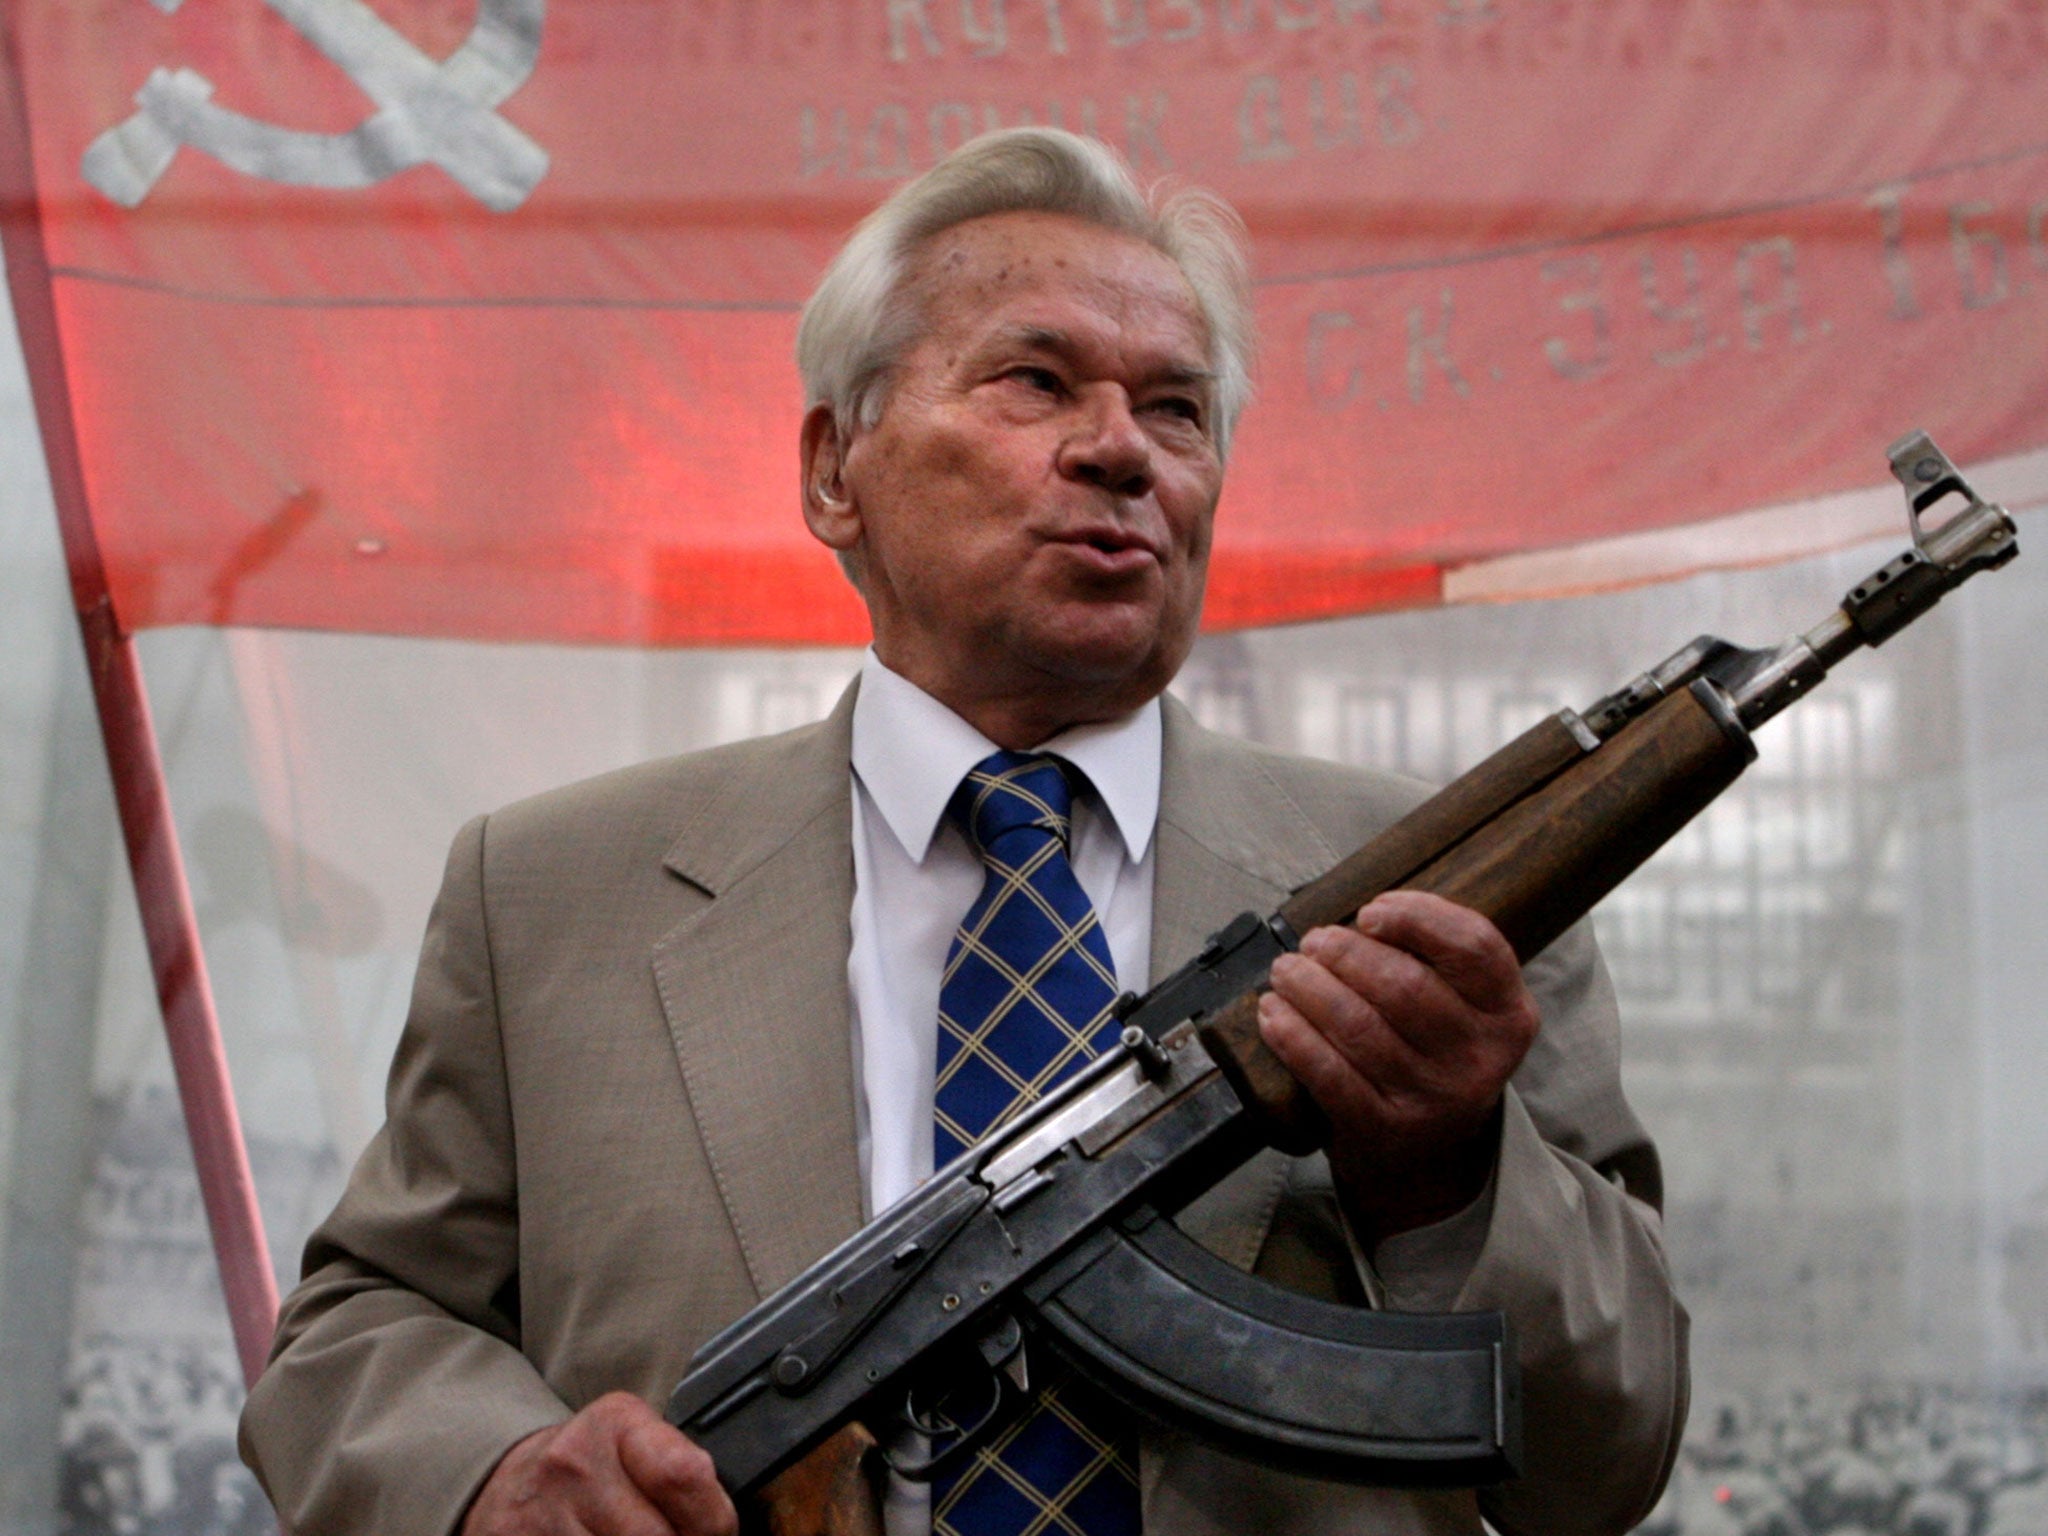 Mikhail Kalashnikov posing with the first model of his legendary AK-47 - he died on 23 December, 2013 at the age of 94